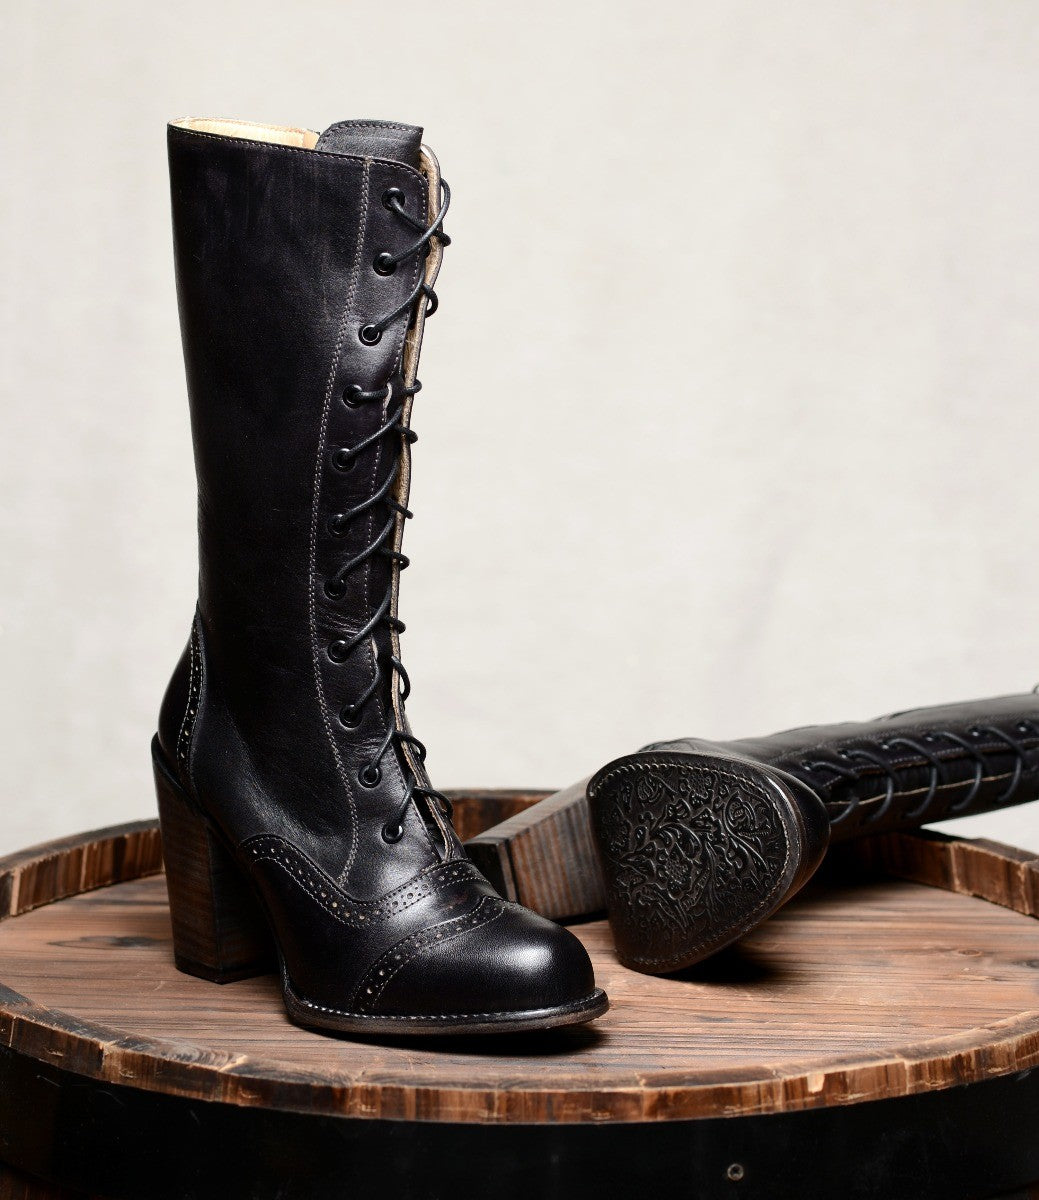 Victorian Inspired Mid-Calf Leather Boots in Black Rustic